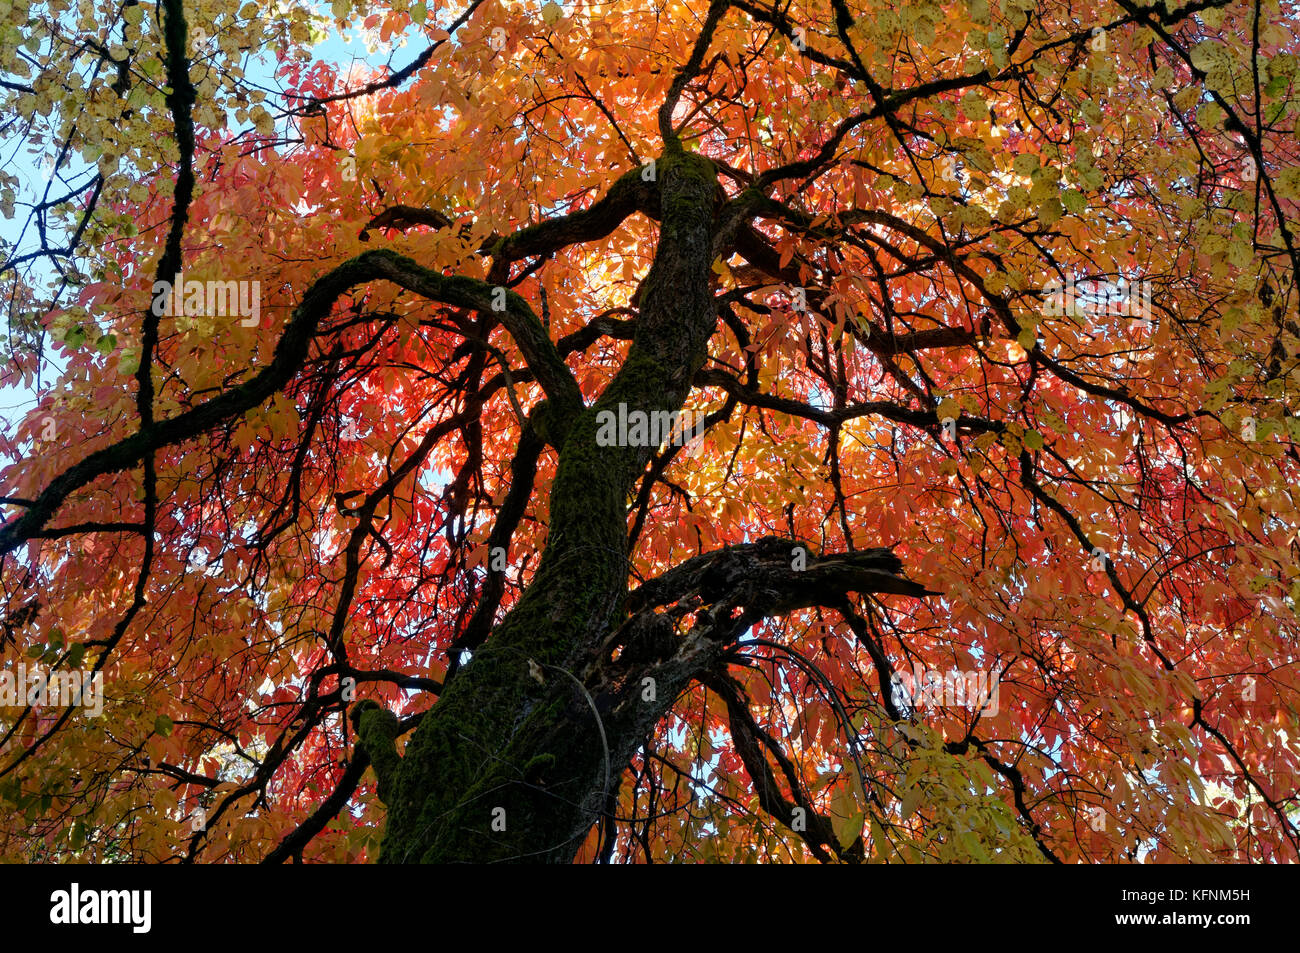 Colorful fall foliage of a big leaf linden tree Tilia platyphyllos, Shaughnessy Park, Vancouver, BC, Canada Stock Photo